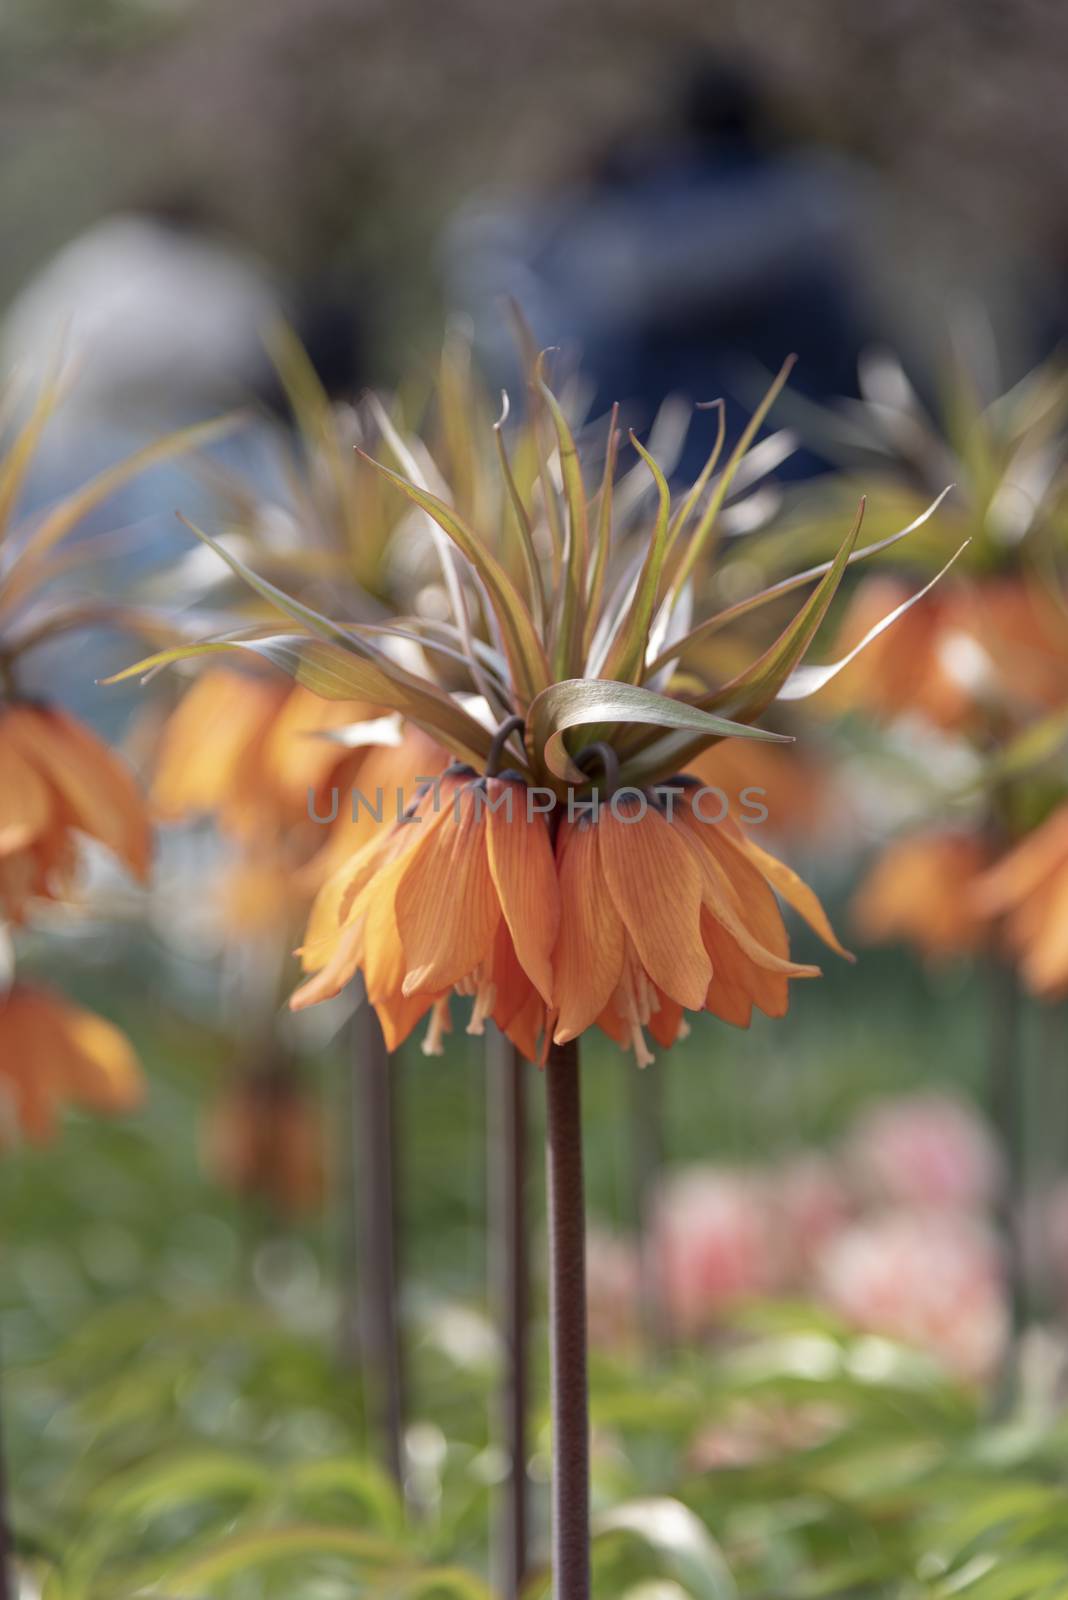 Vertical view of an orange Crown Imperial flowers against a blur flower background under a sunny day light by ankorlight